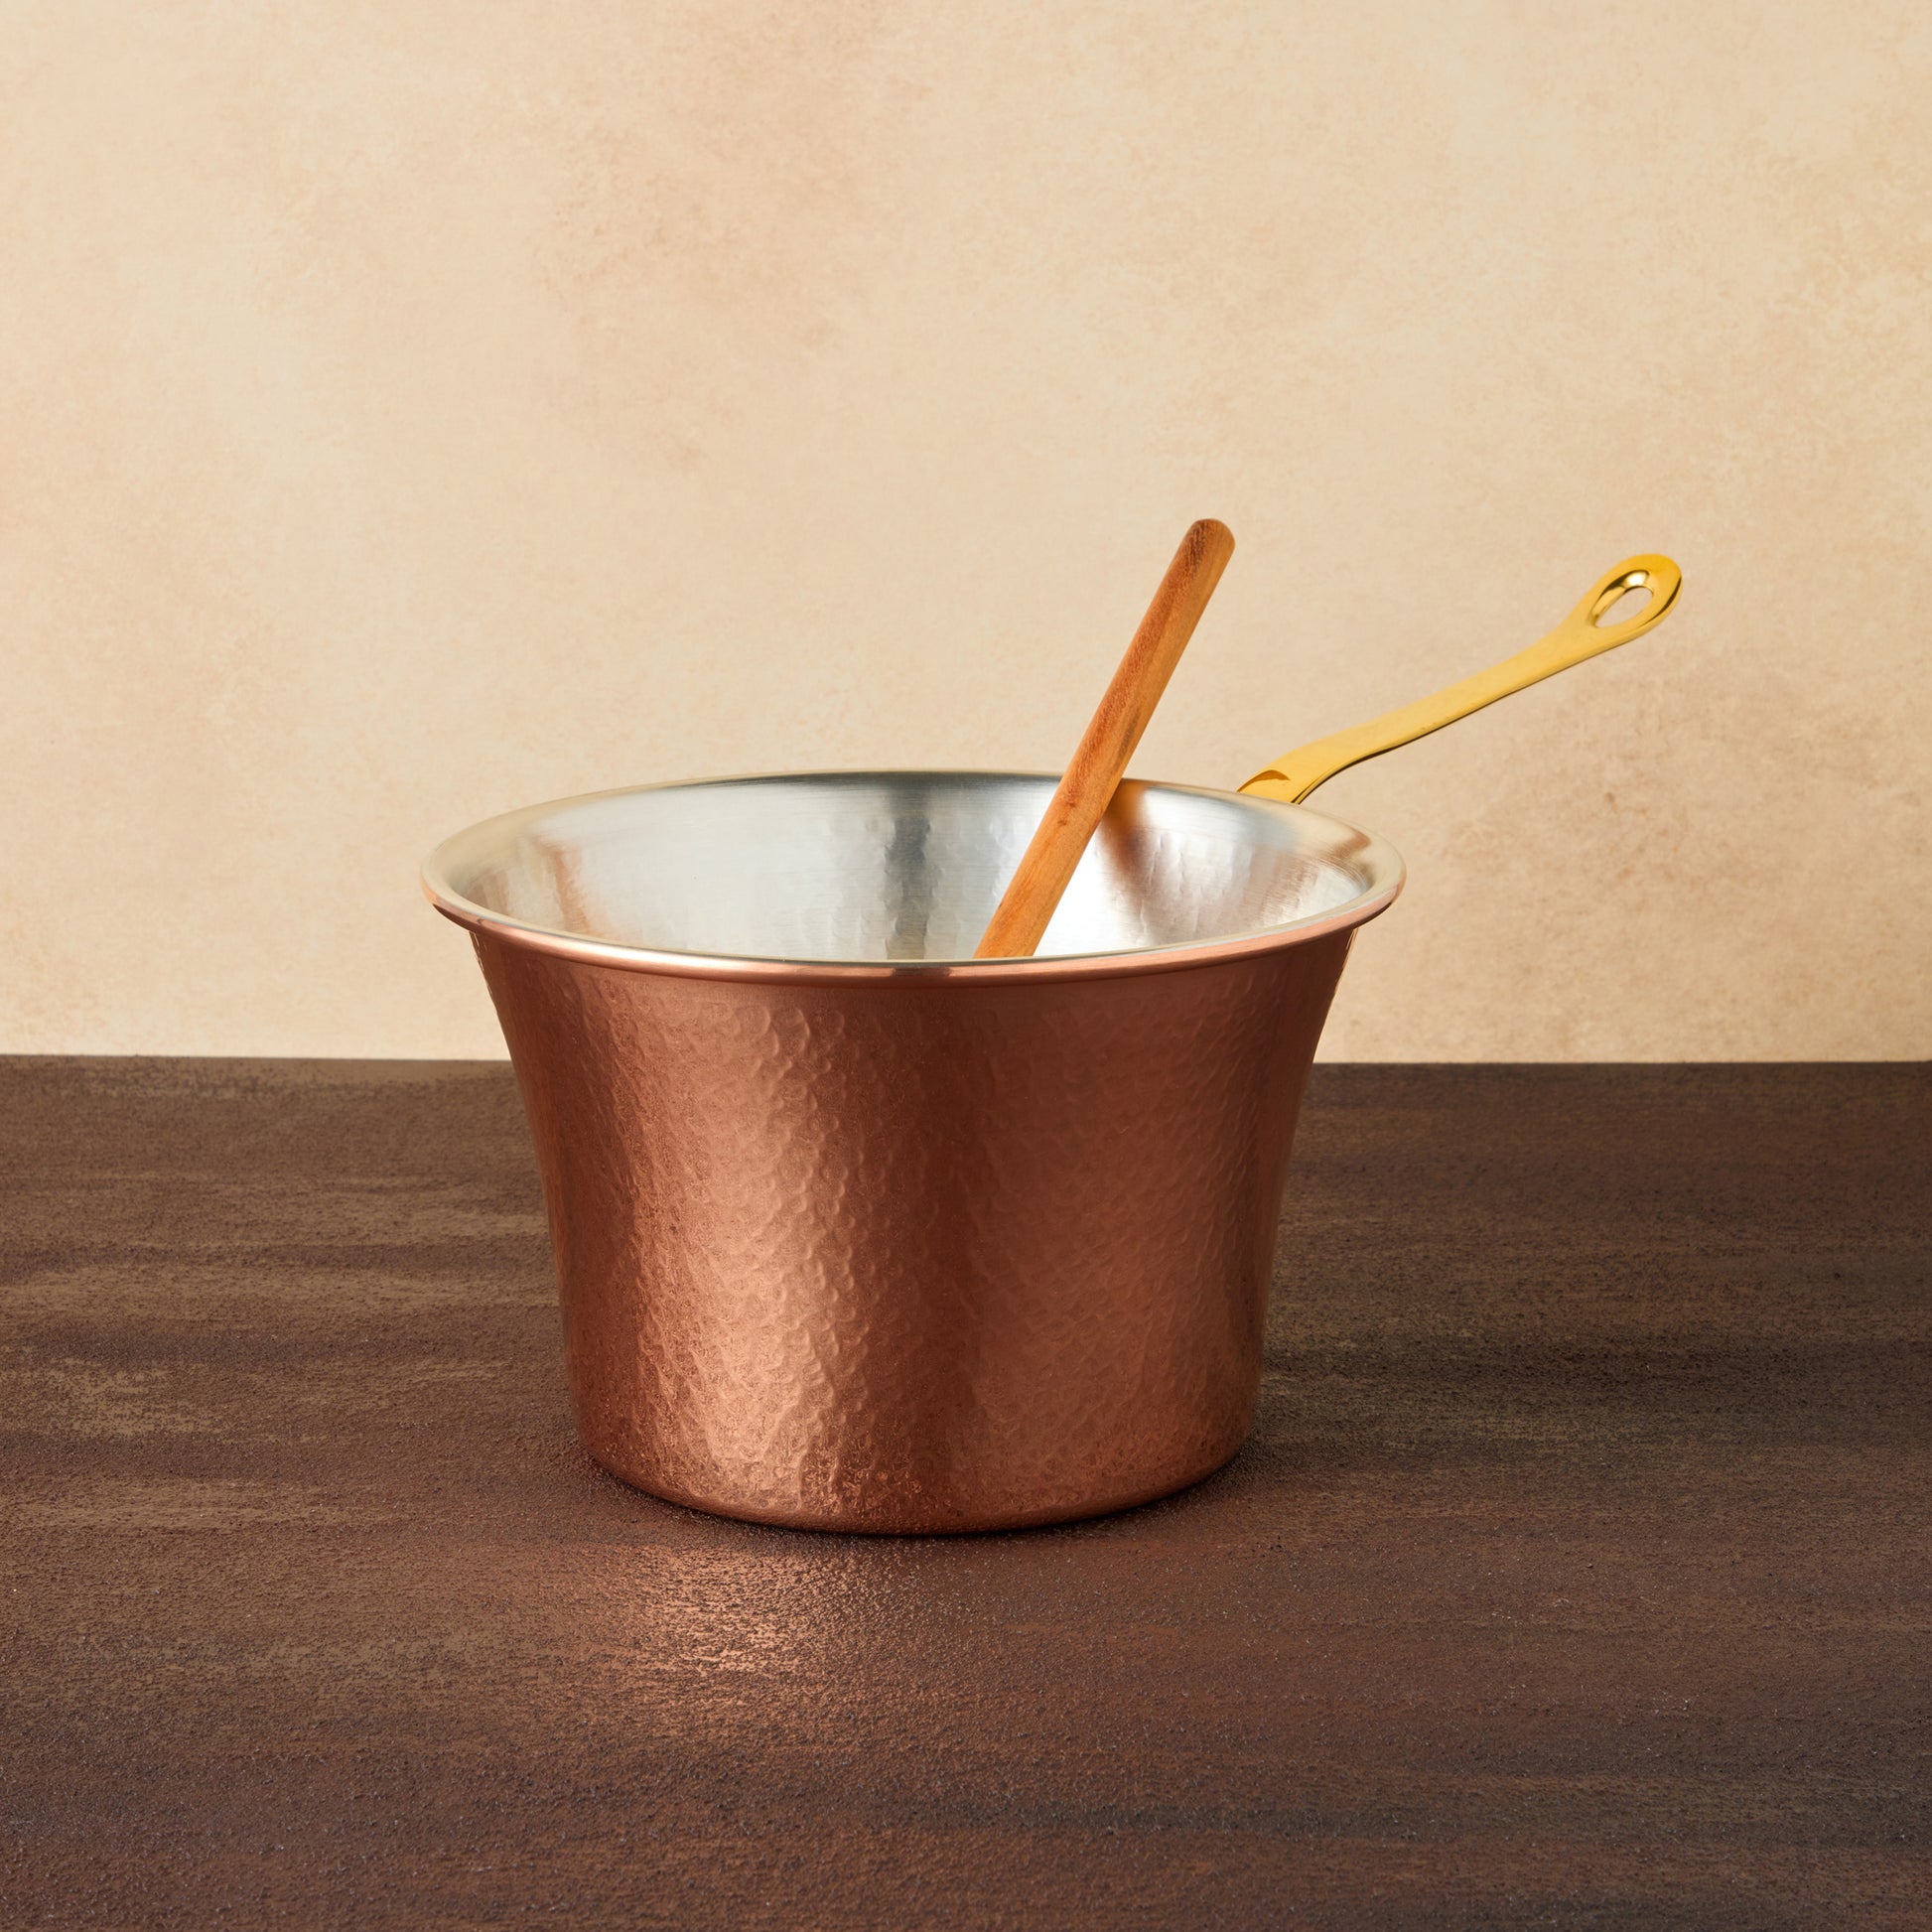 Ruffoni Historia polenta pot in hammered copper and tin lined by hand over fire